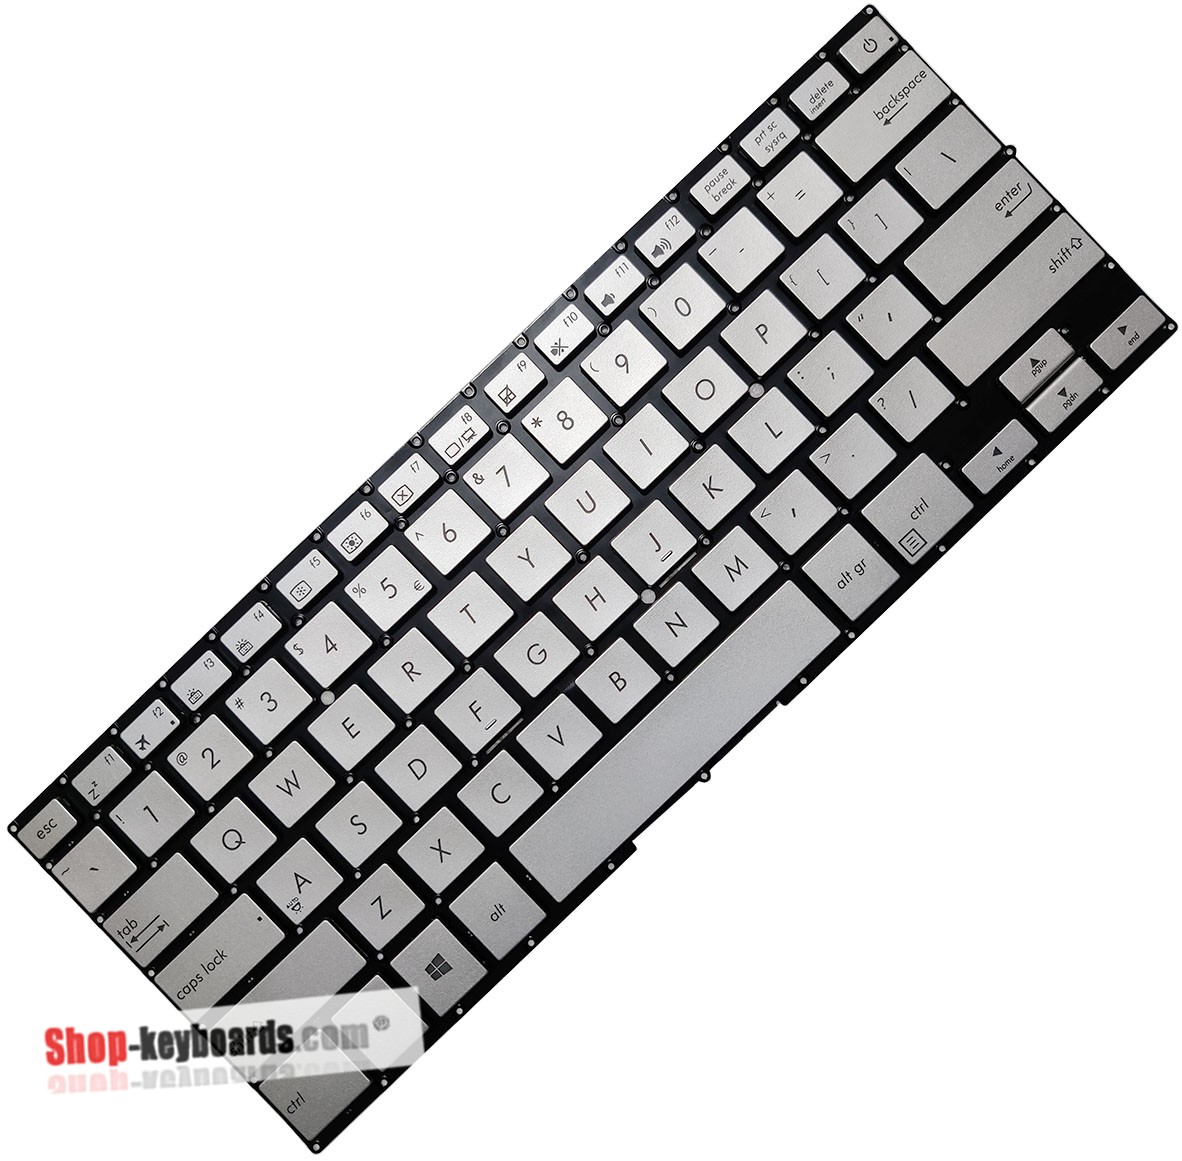 Asus 0KNB0-D620ND00 Keyboard replacement